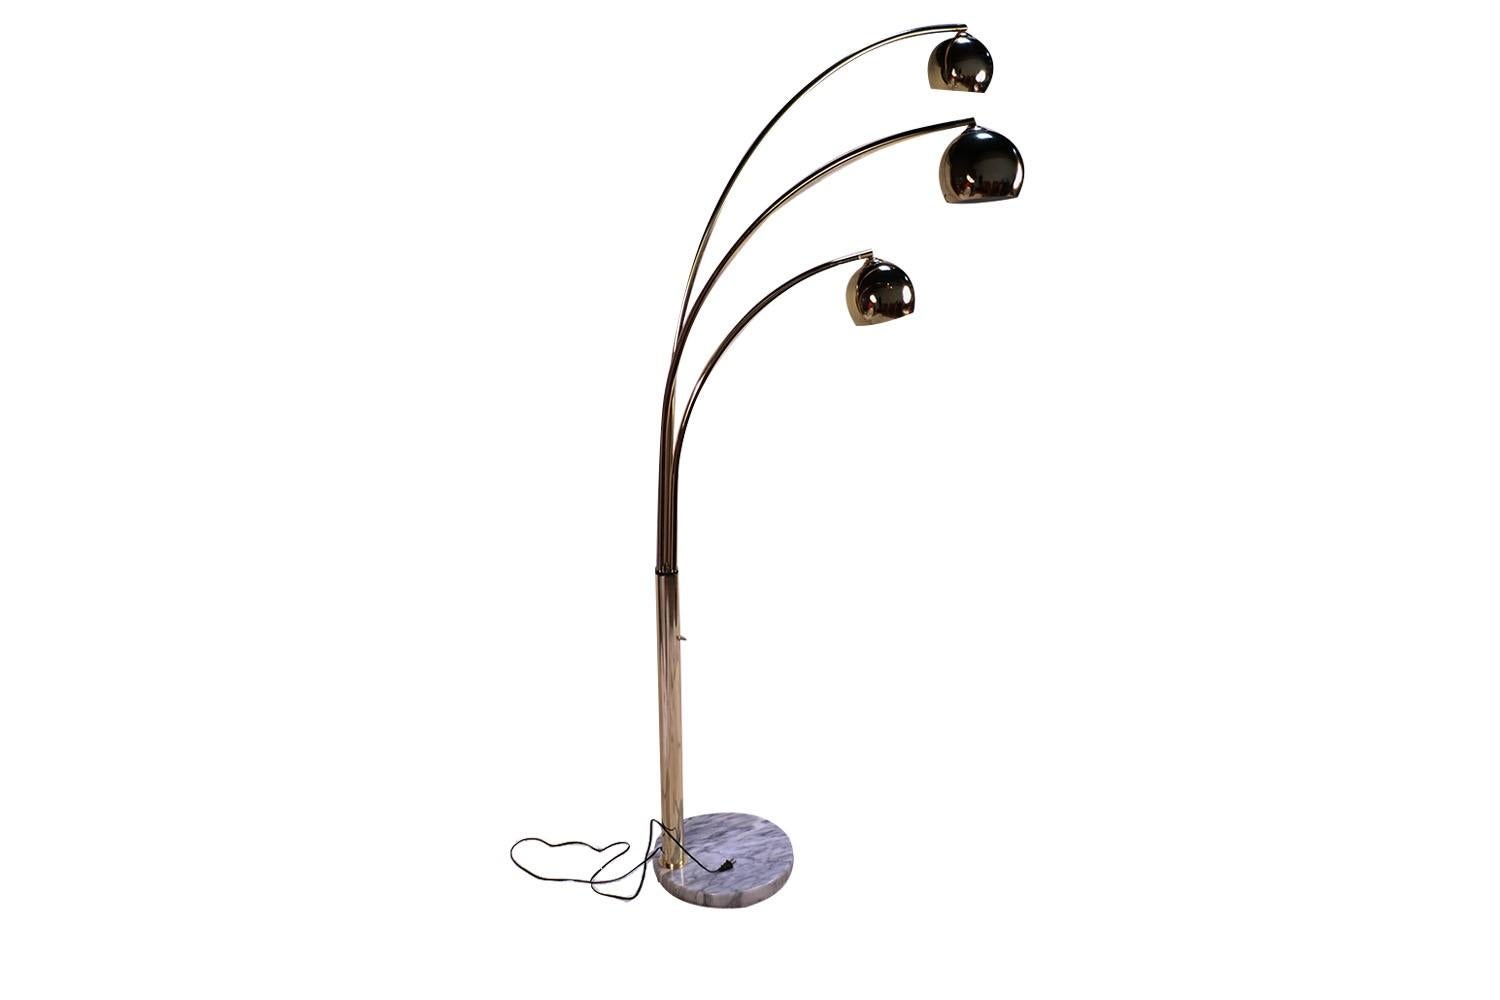 Stunning monumental arc 3 arm floor lamp, circa 1970s, designed in the manner of Italian designer Castiglioni. Features three brass spherical shades atop three independently, swivel brass cantilever rods, supported by a beautiful thick, white veined